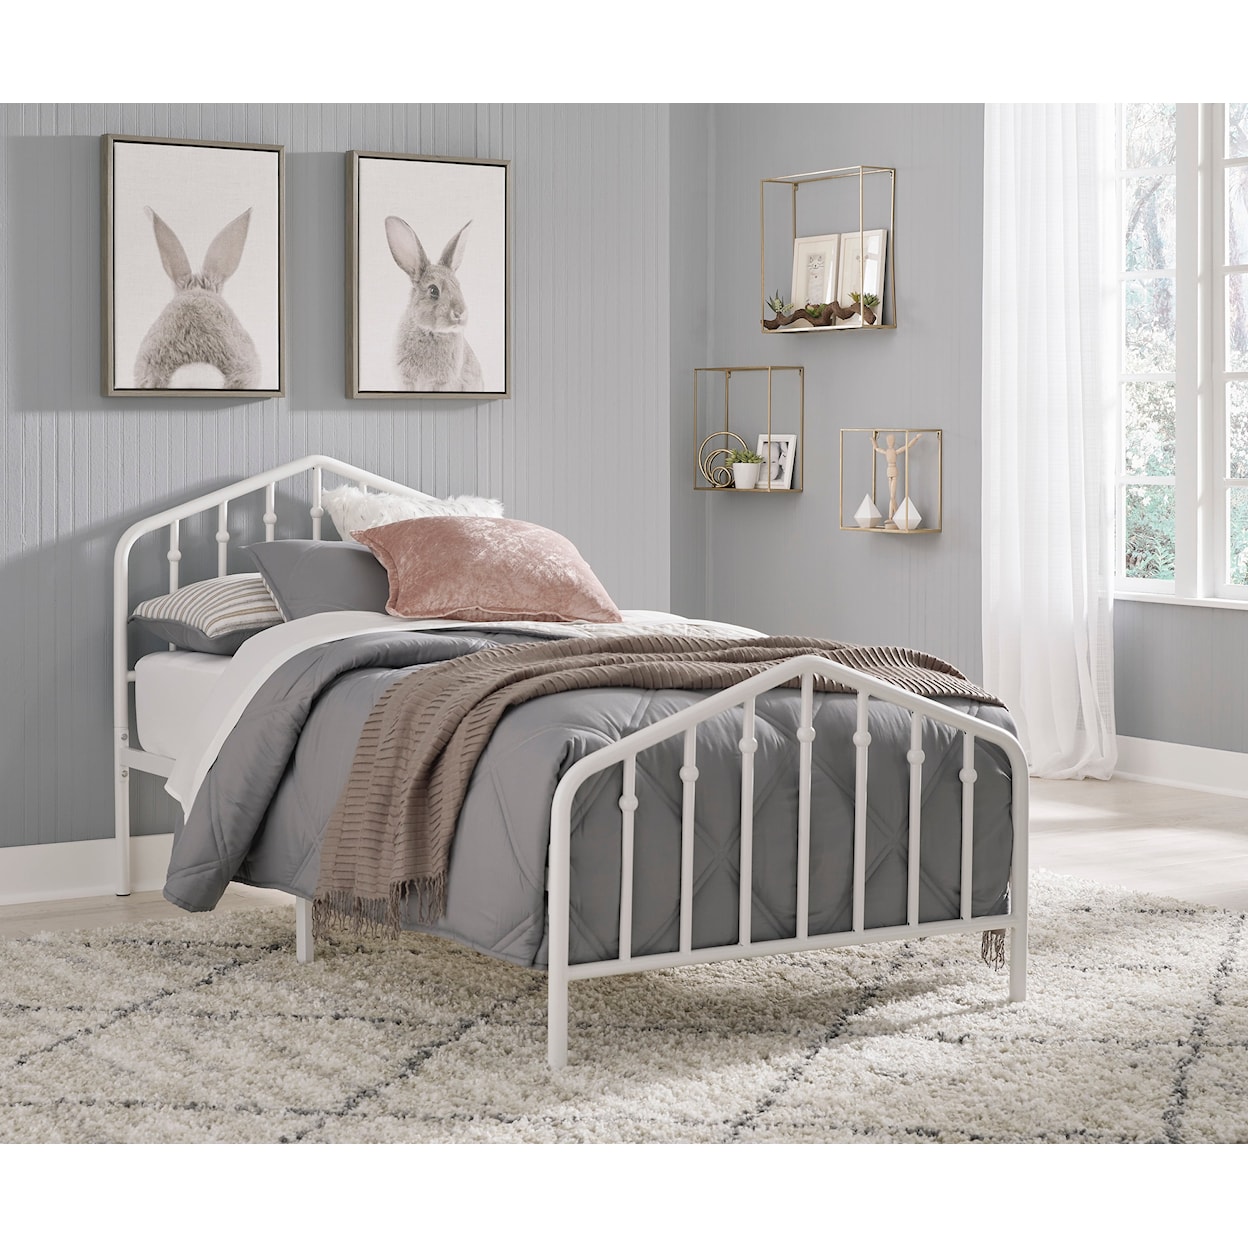 Signature Design by Ashley Furniture Trentlore Twin Metal Bed